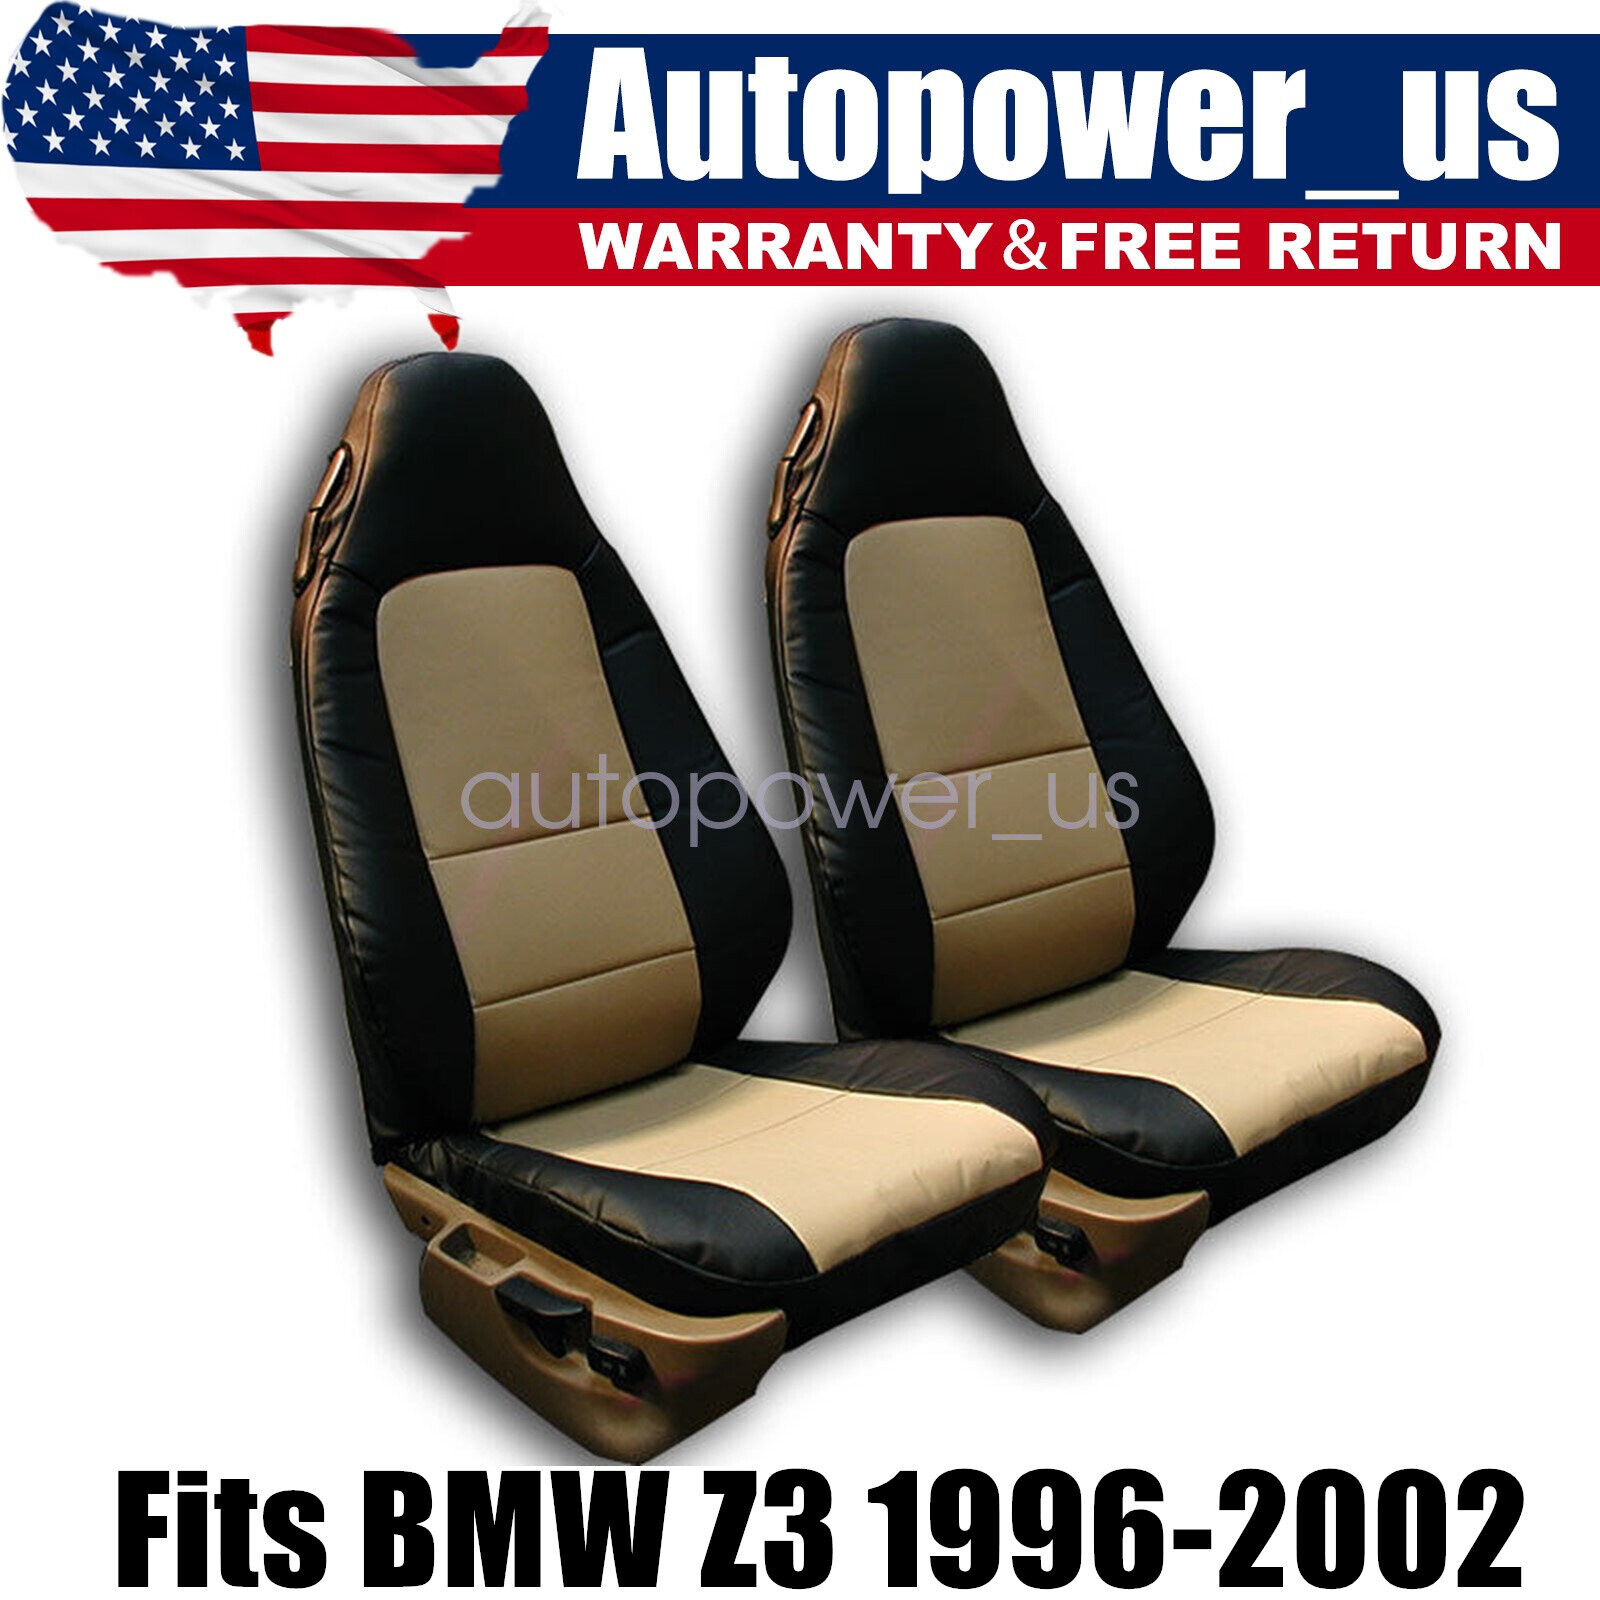 Fits BMW Z3 1996-2002 Full Surround 2 Front Leather SEAT COVERS Black/Beige